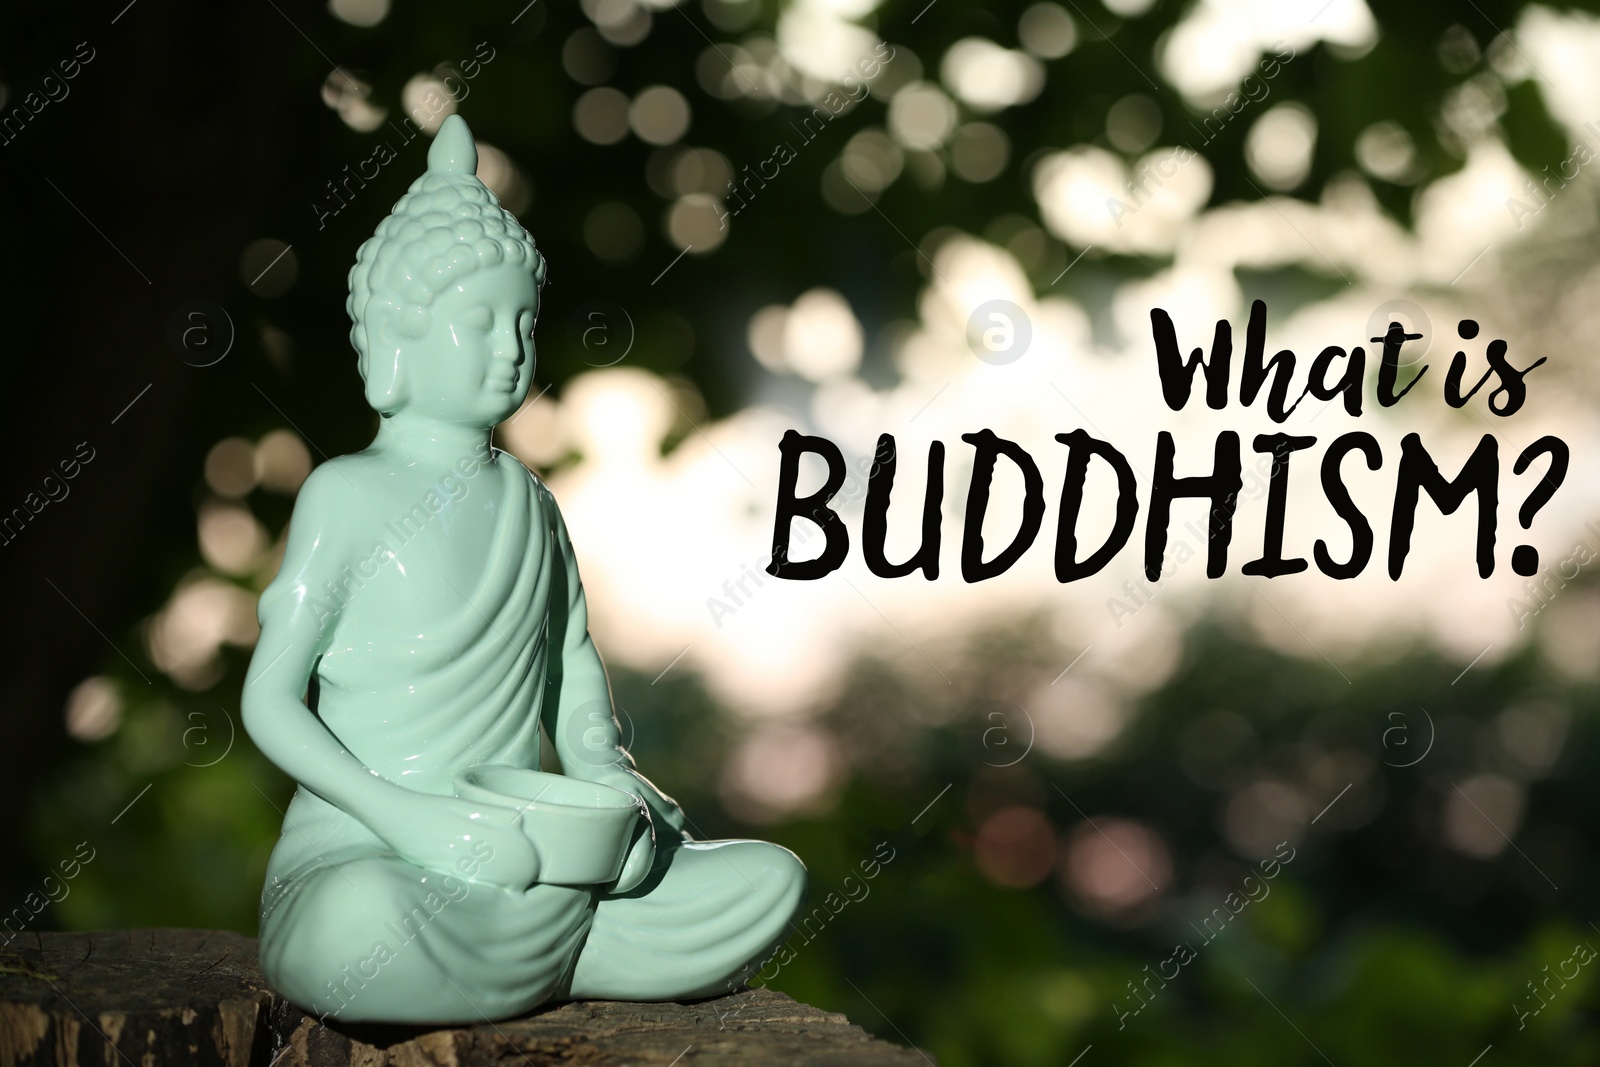 Image of Decorative Buddha statue outdoors and text What Is Buddhism